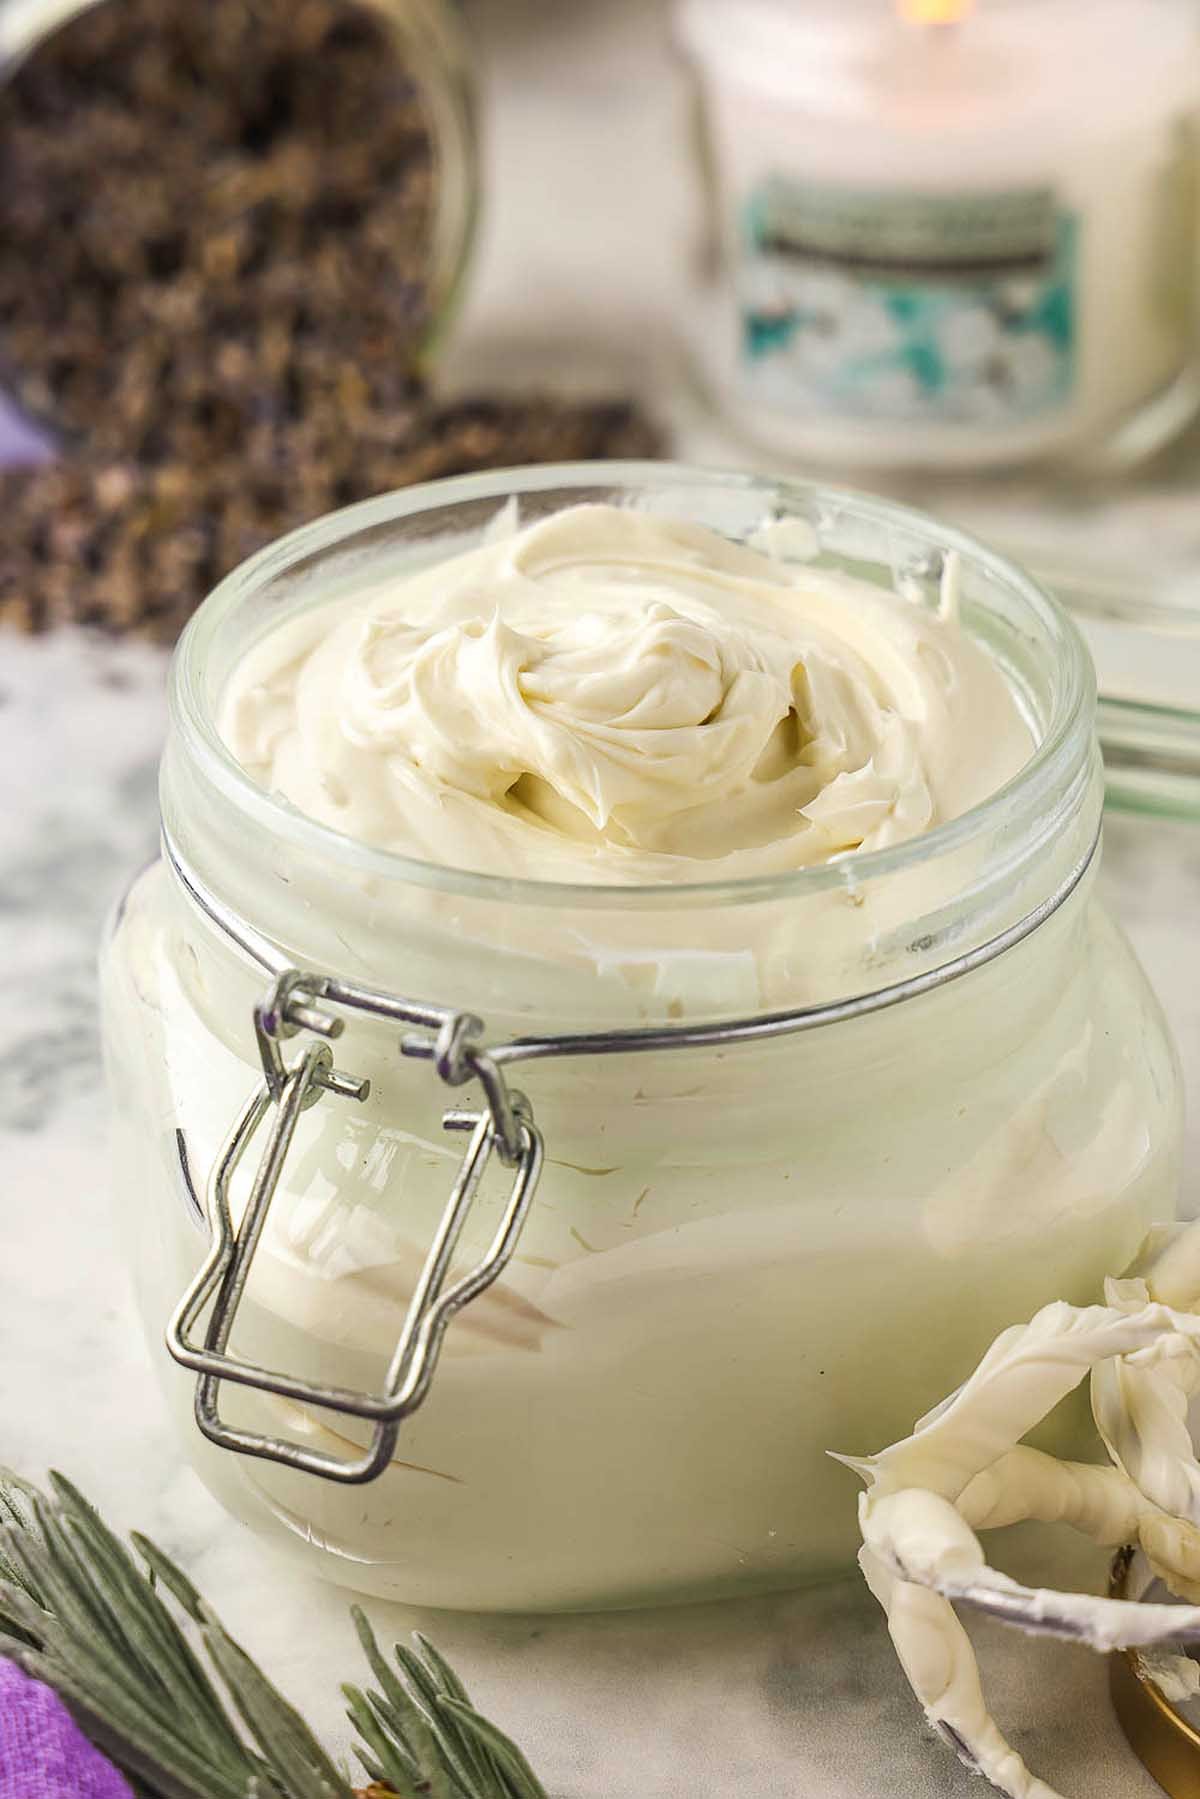 How to Make Body Butter